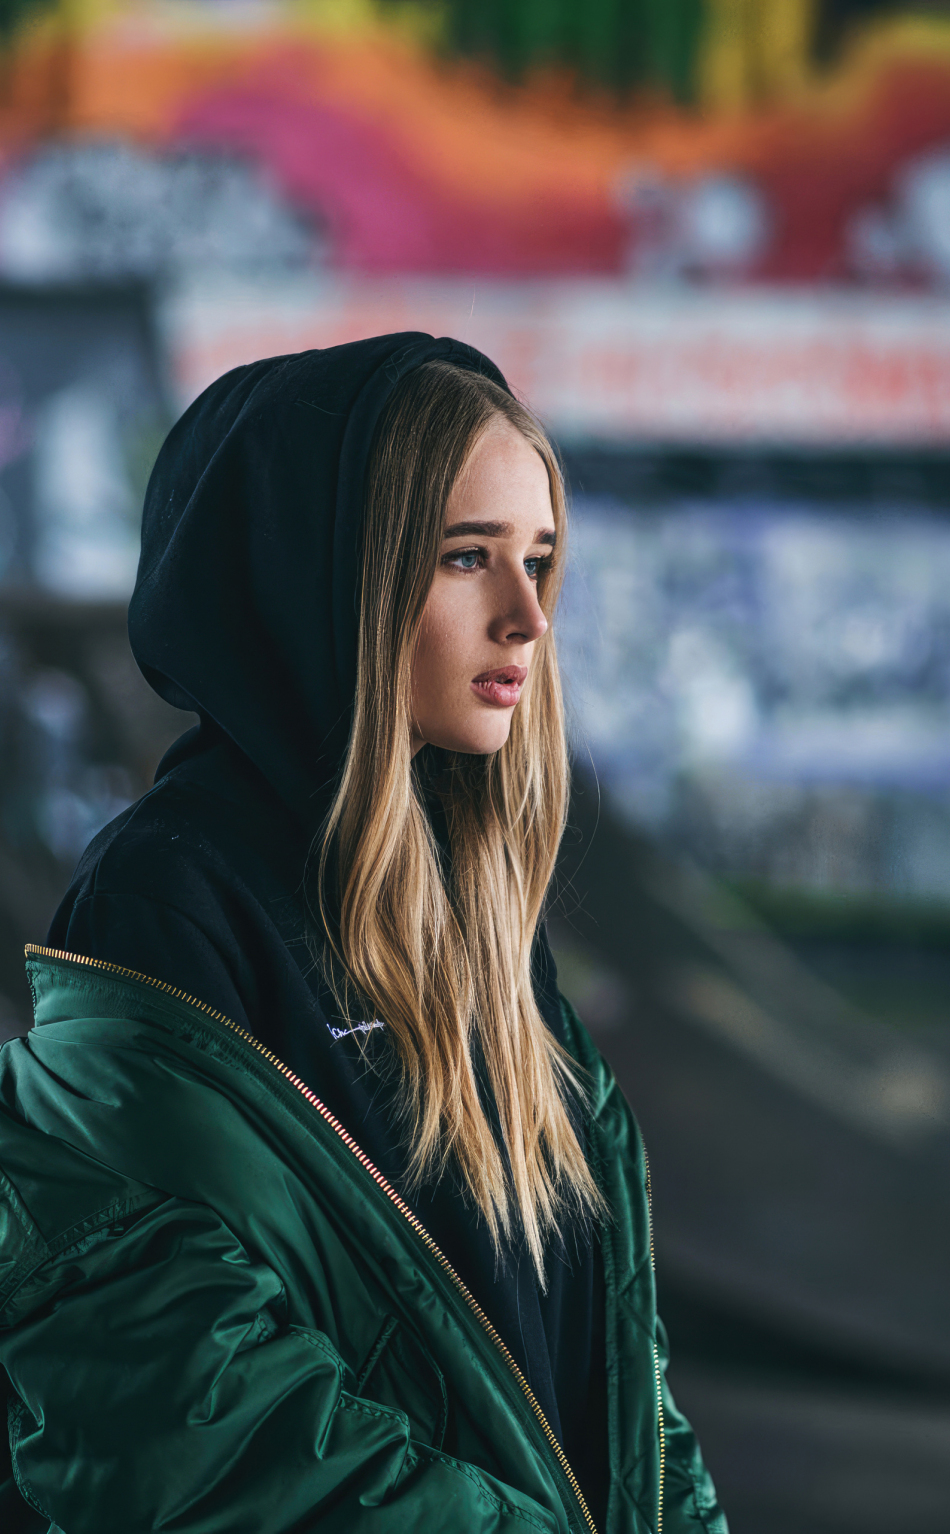 Download wallpaper 950x1534 girl in hoodie, pretty and blonde, iphone ...